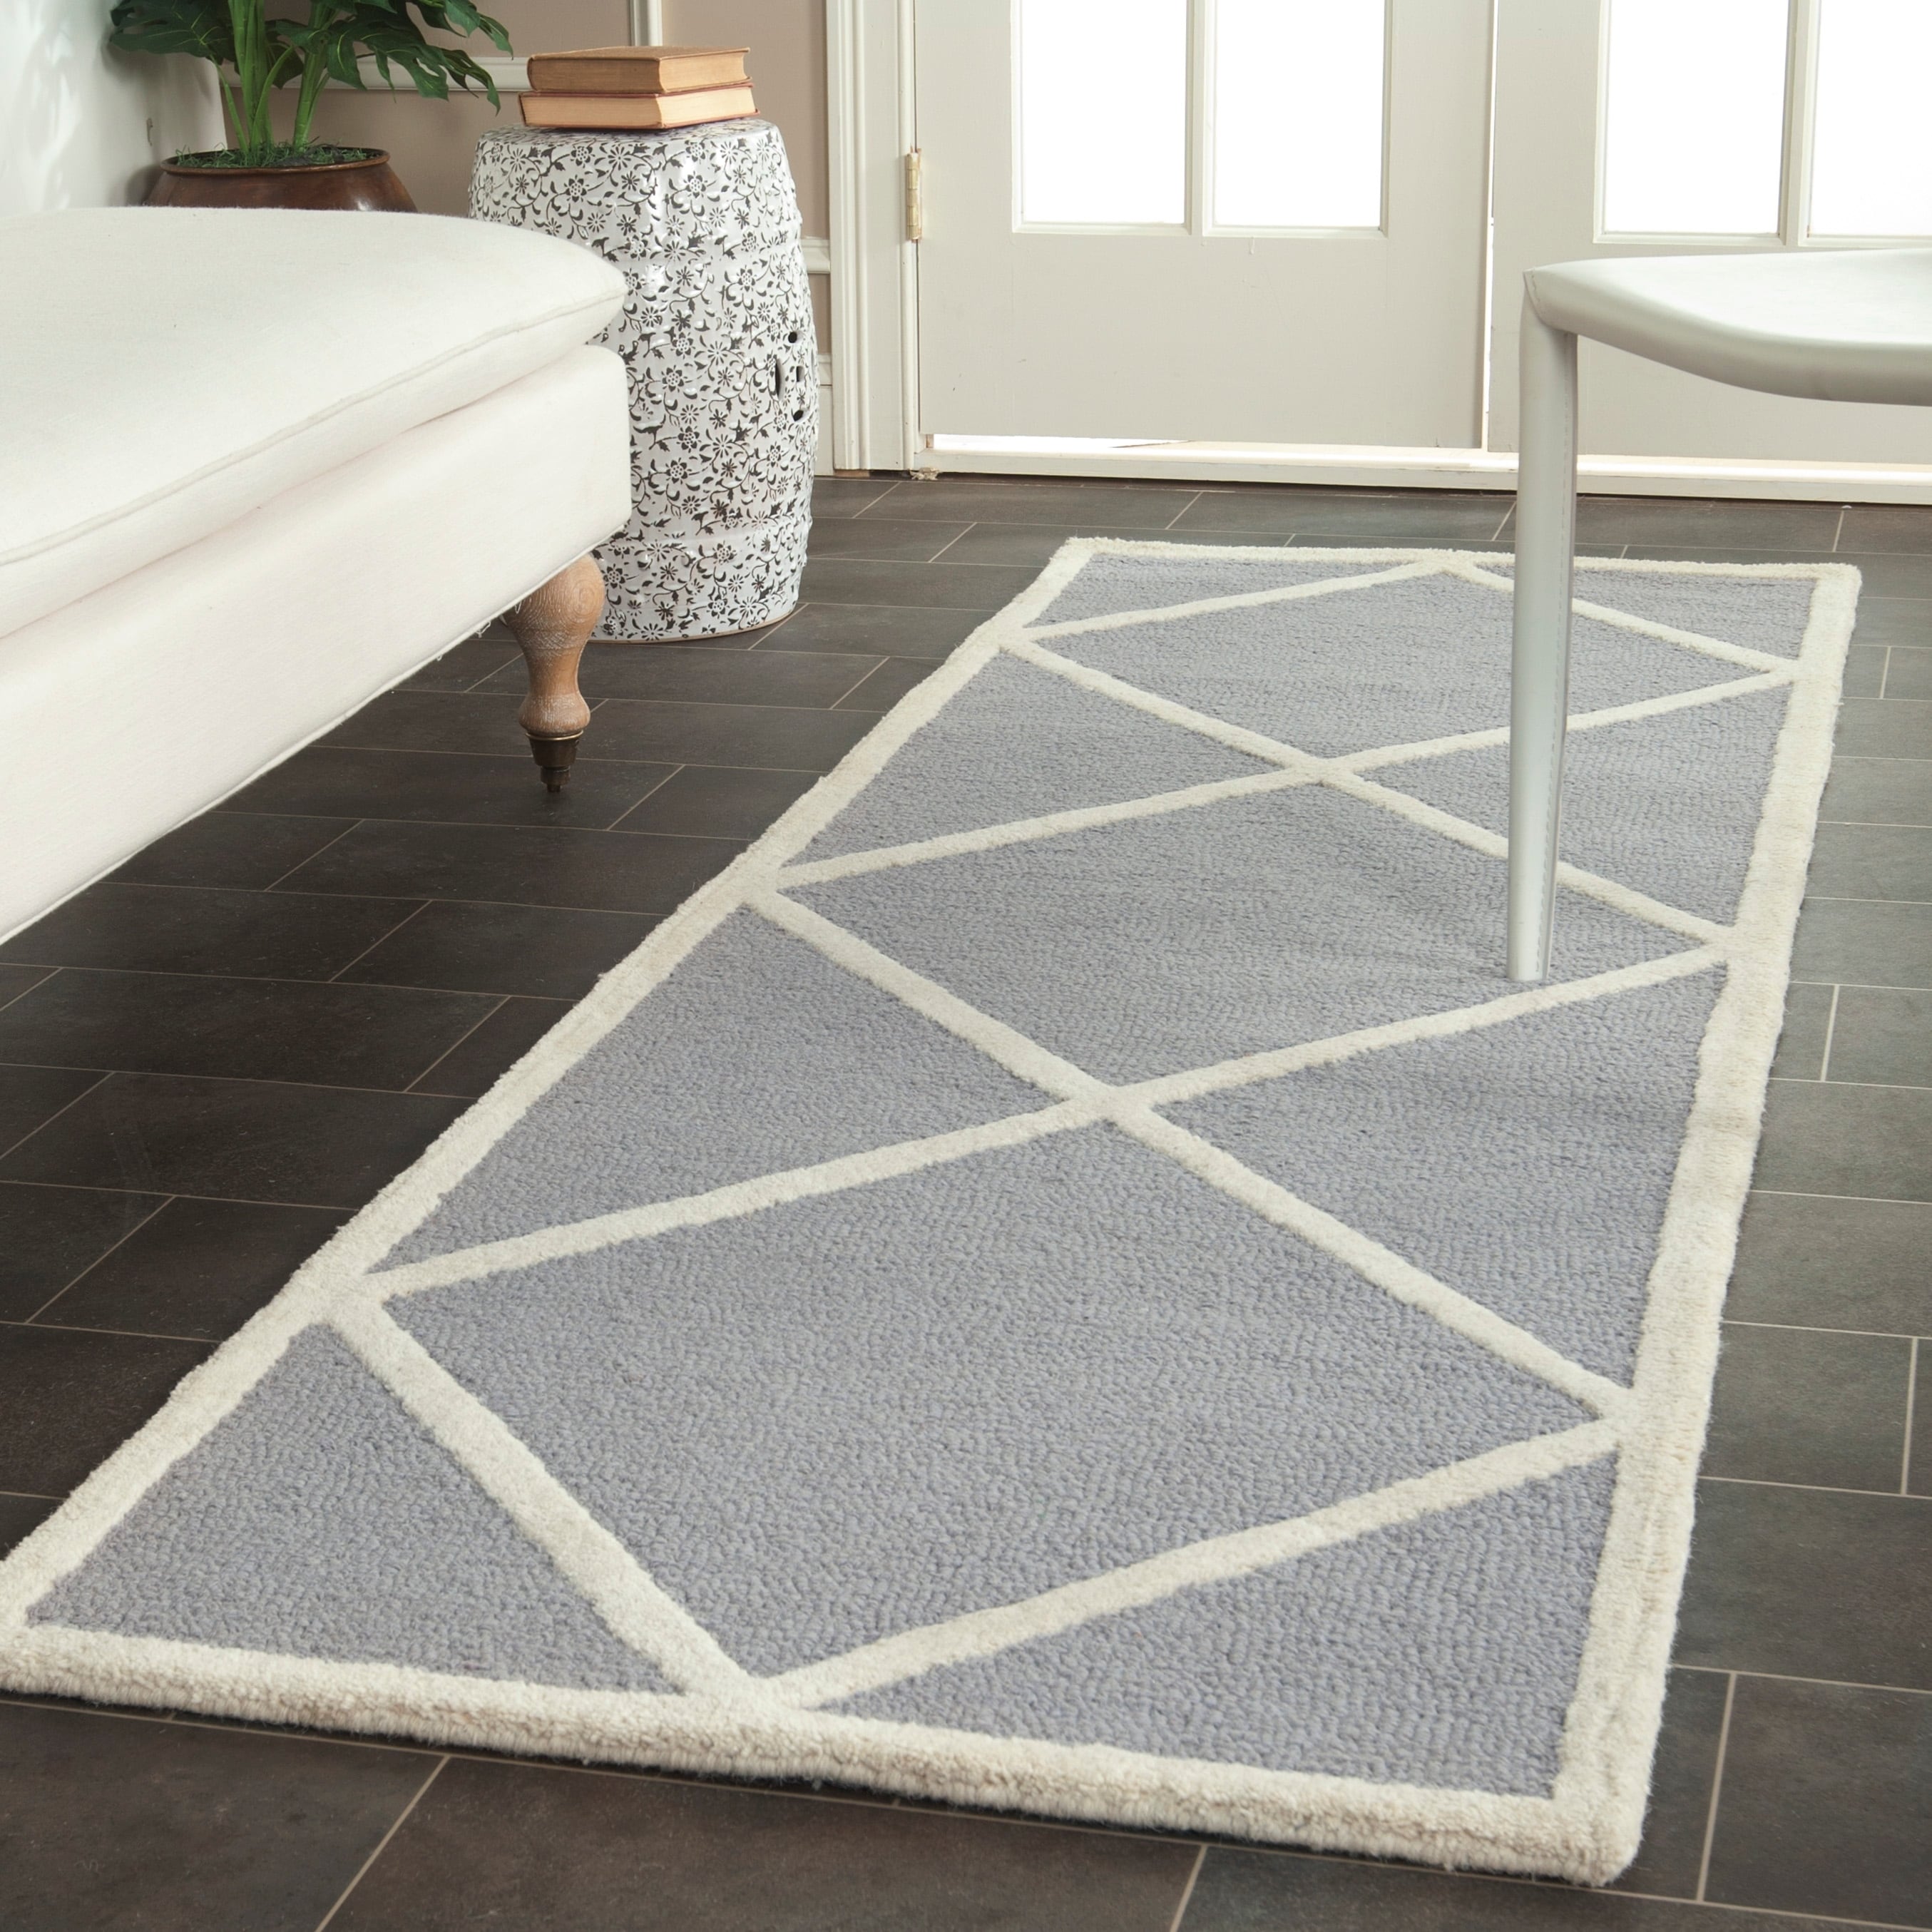 Safavieh Handmade Moroccan Cambridge Silver/ Ivory Wool Rug With Durable Backing (26 X 6)